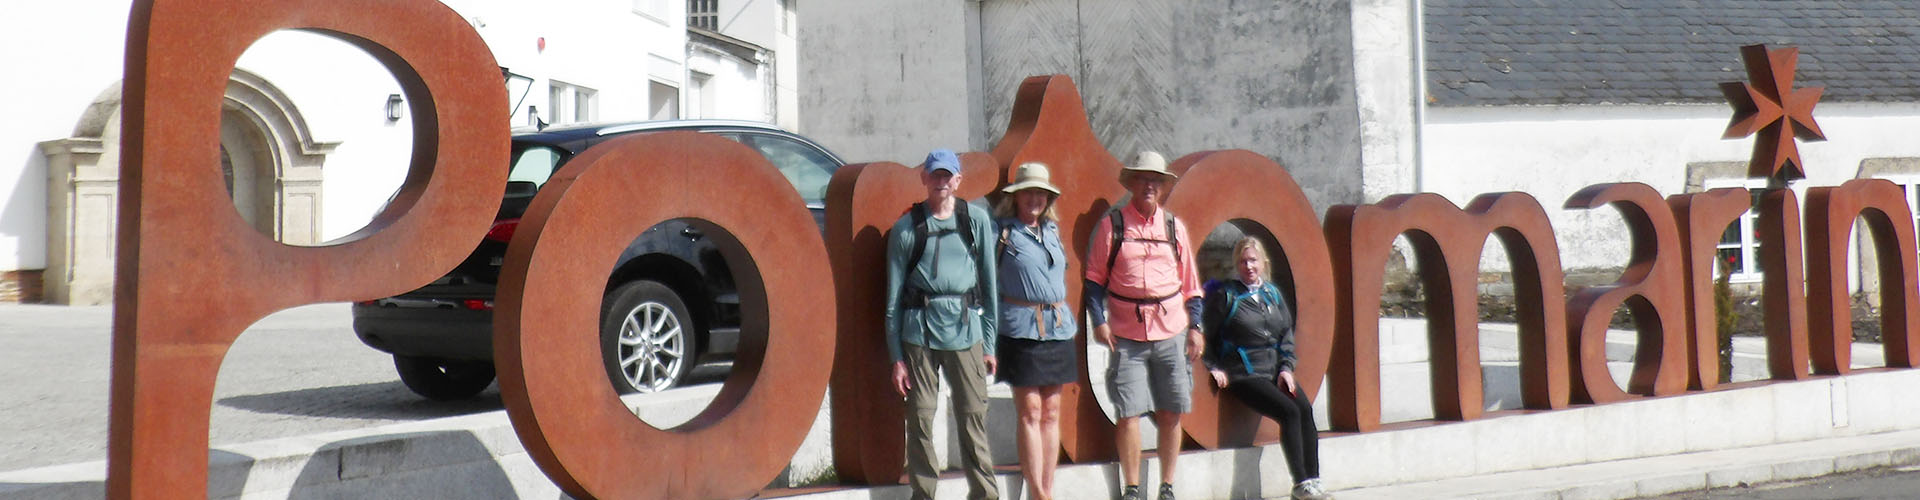 pilgrims standing by Camino sign in Portomarin